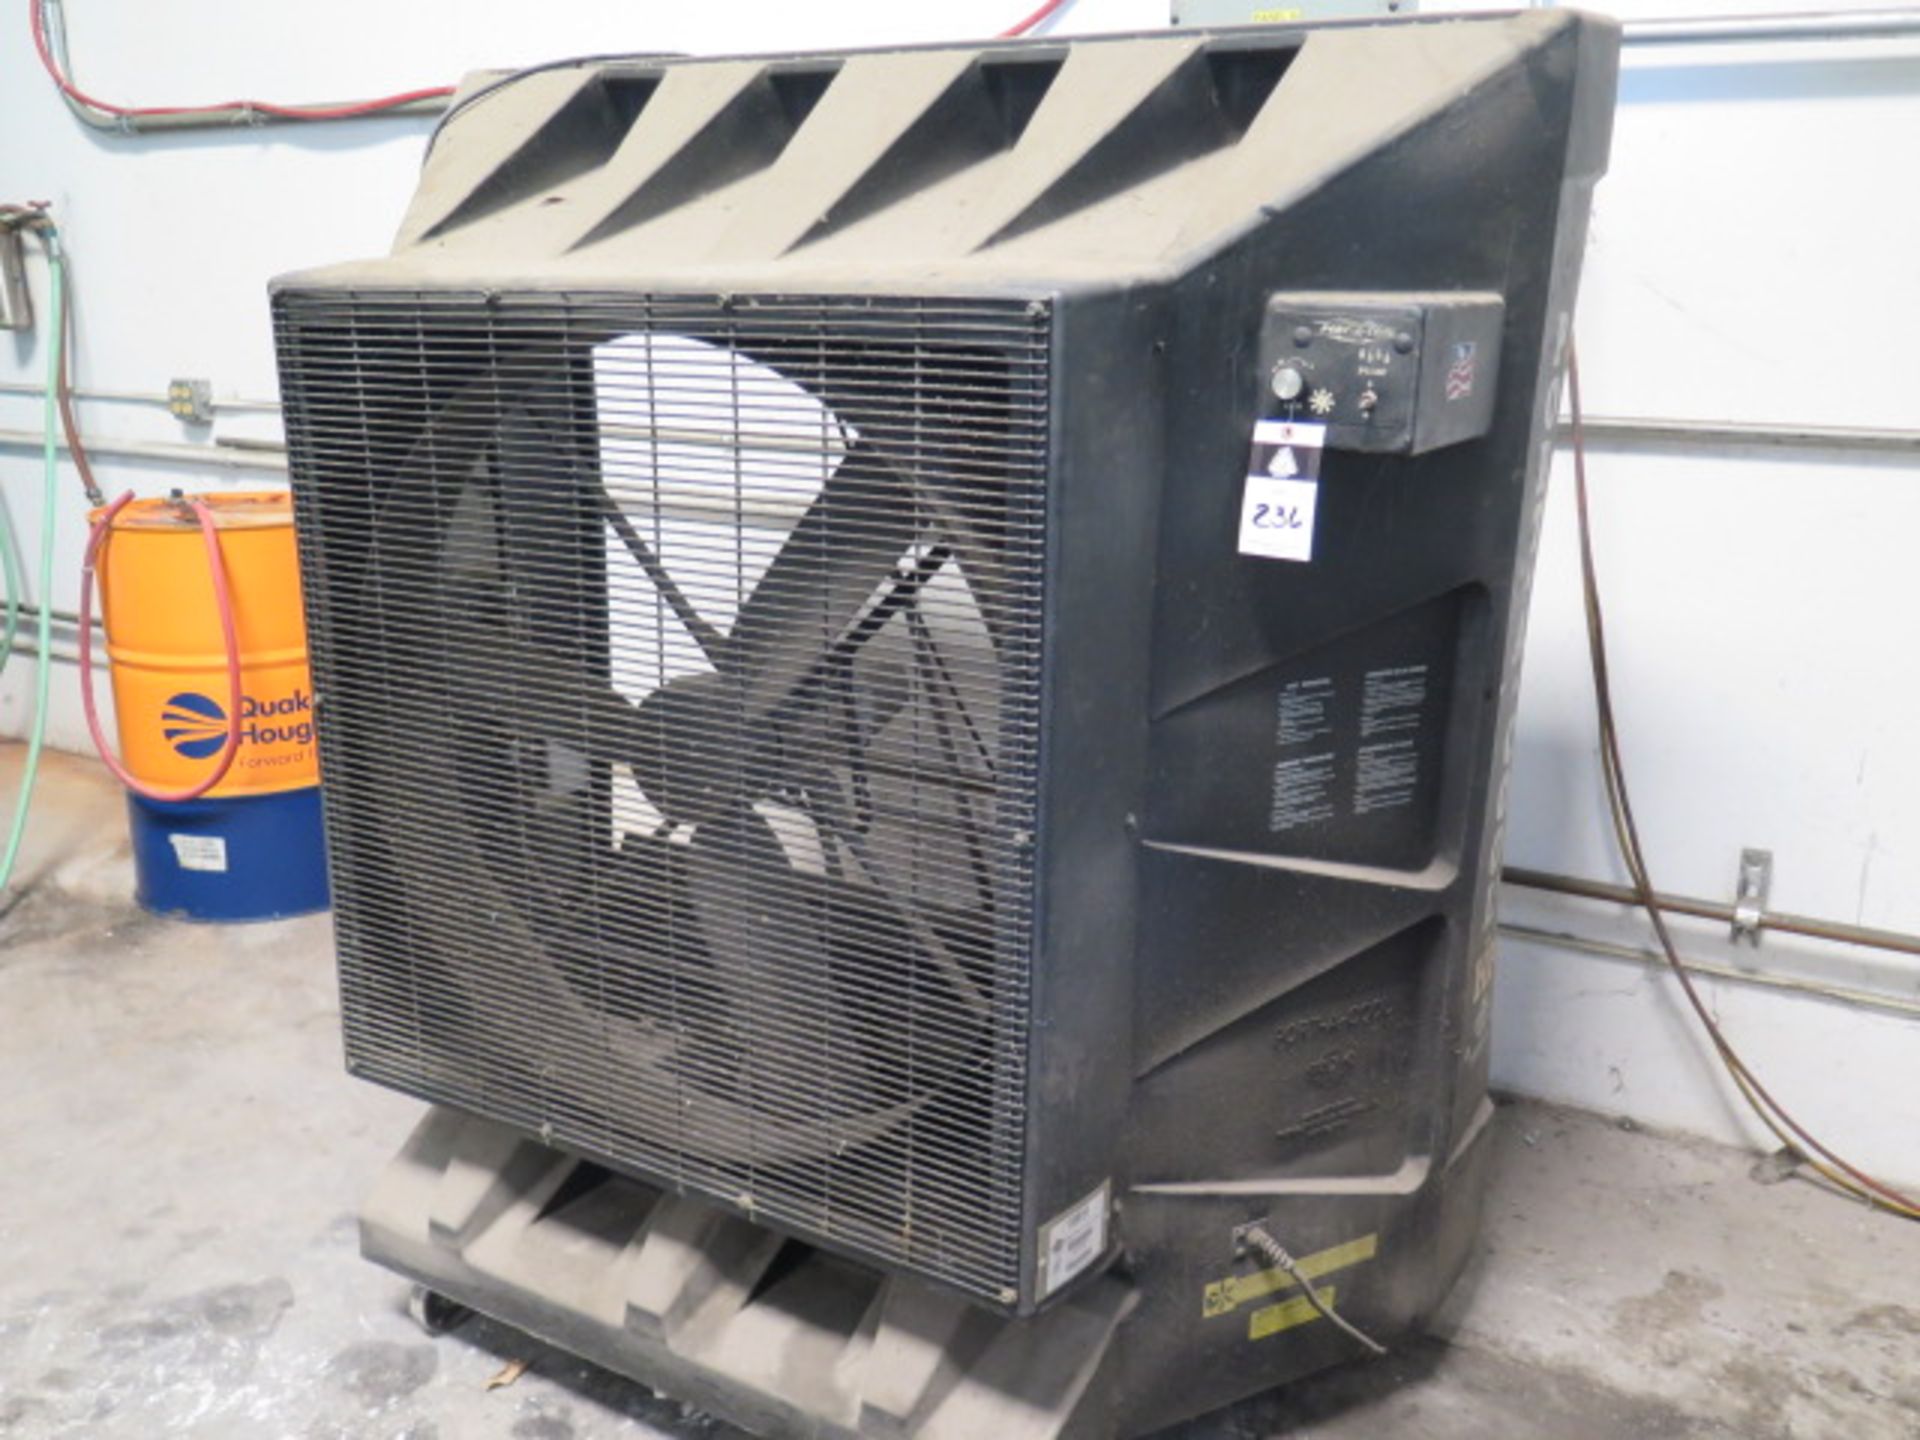 Porta-Cool mdl. HP Portable Swamp Cooler (NEEDS Filter Element) (SOLD AS-IS - NO WARRANTY)